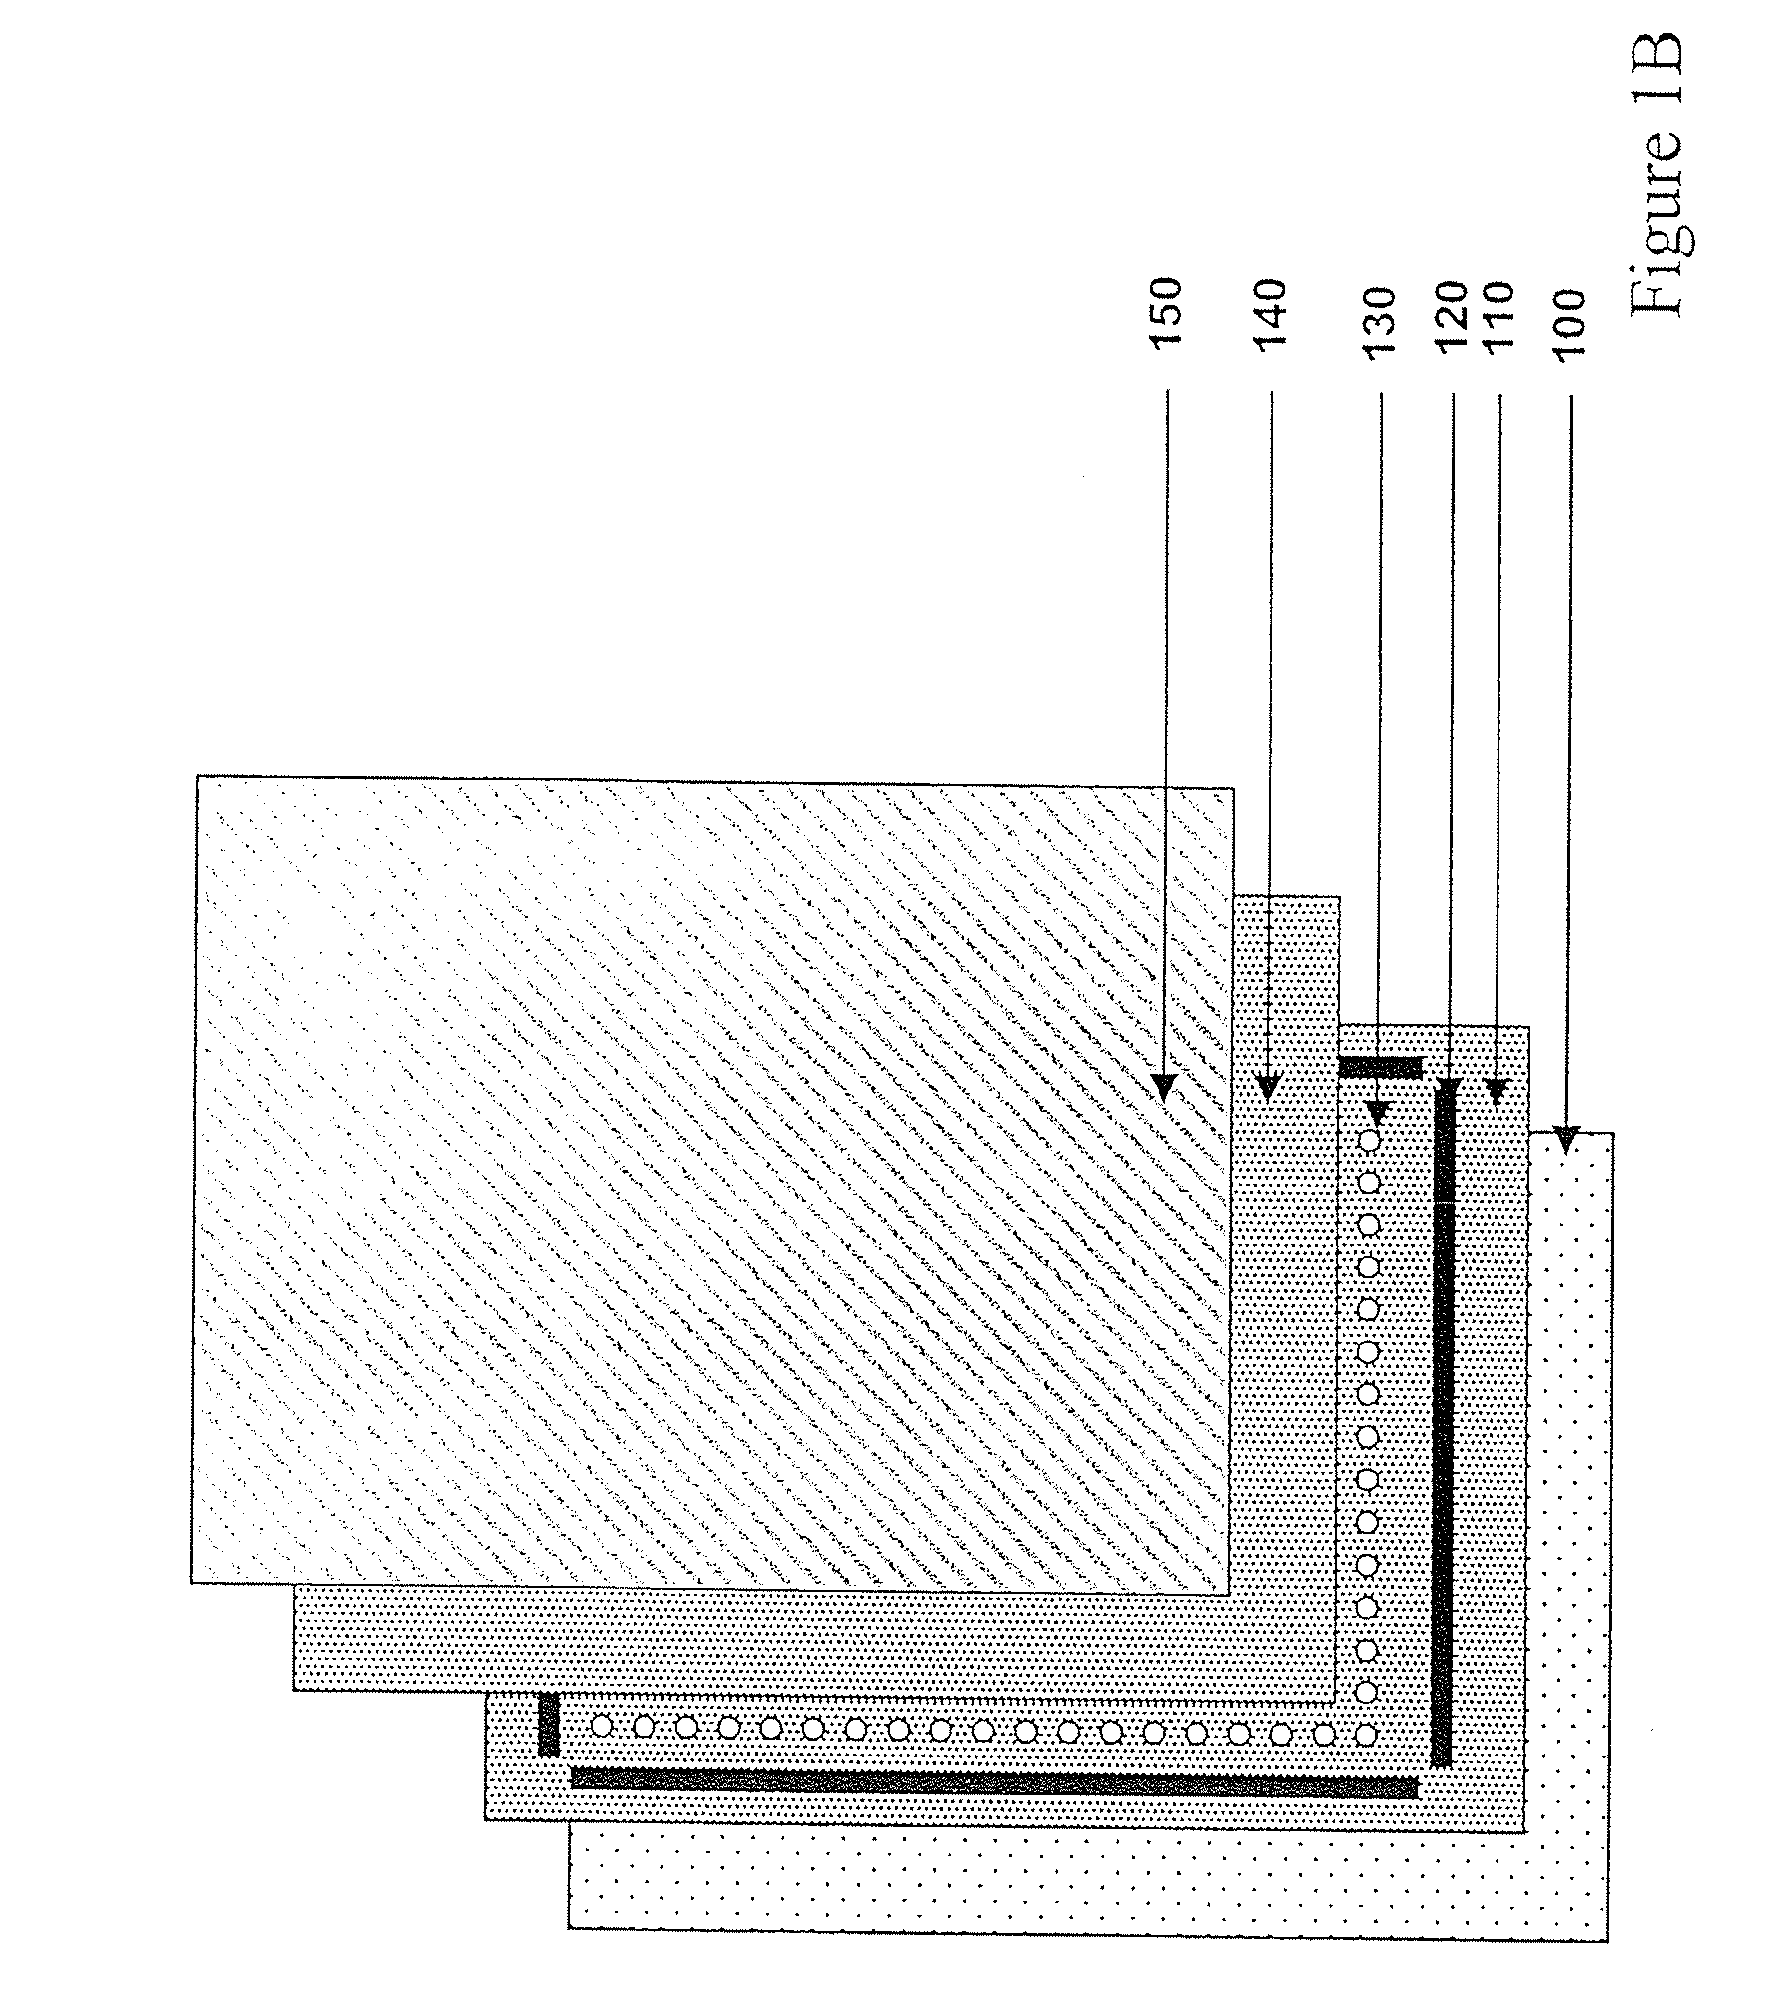 Symmetric touch screen system with carbon nanotube-based transparent conductive electrode pairs